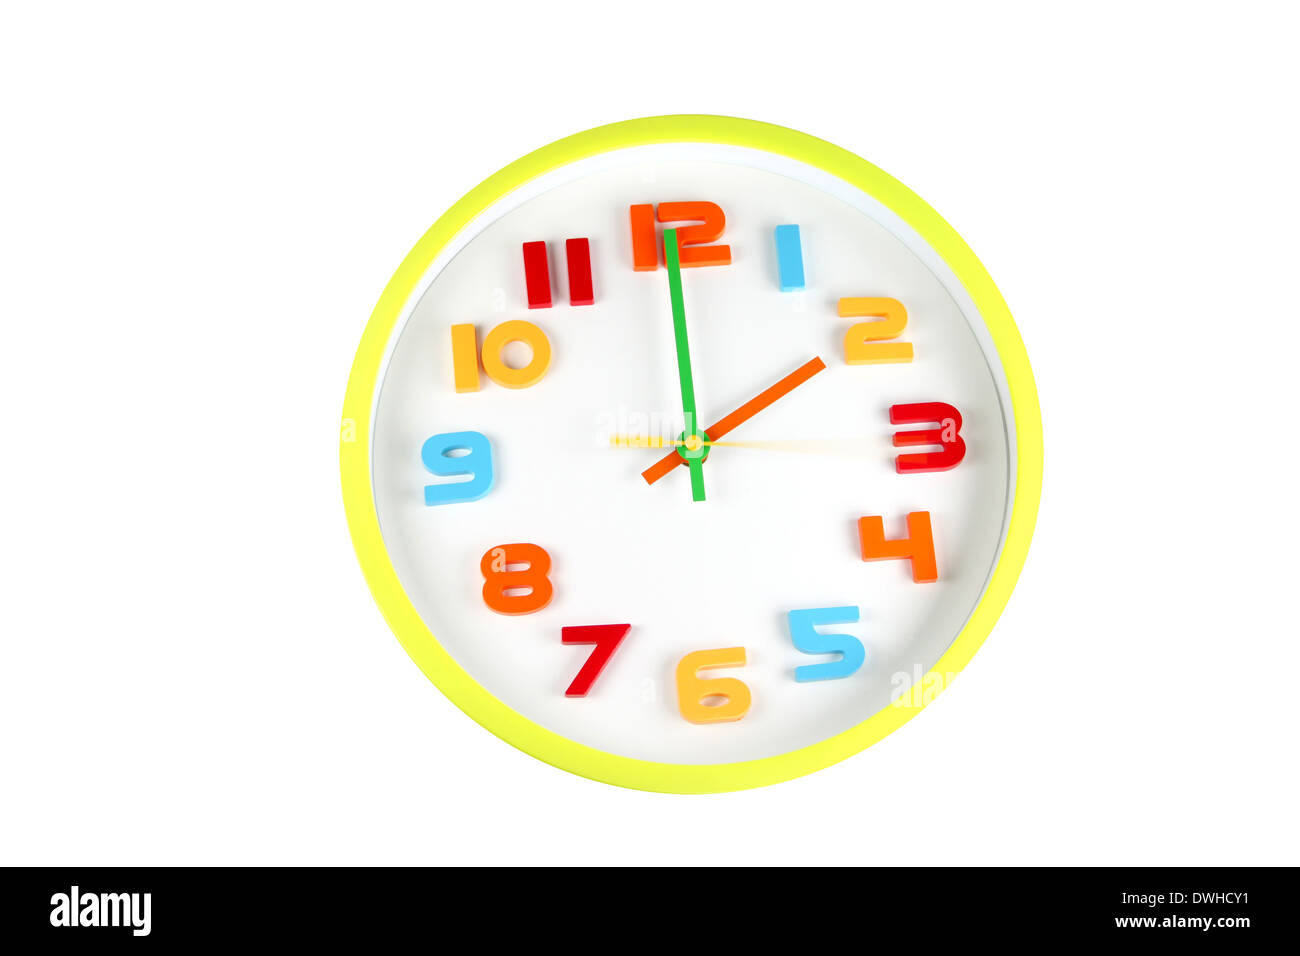 Colorful clock in telling time of two o'clock on white background. Stock Photo